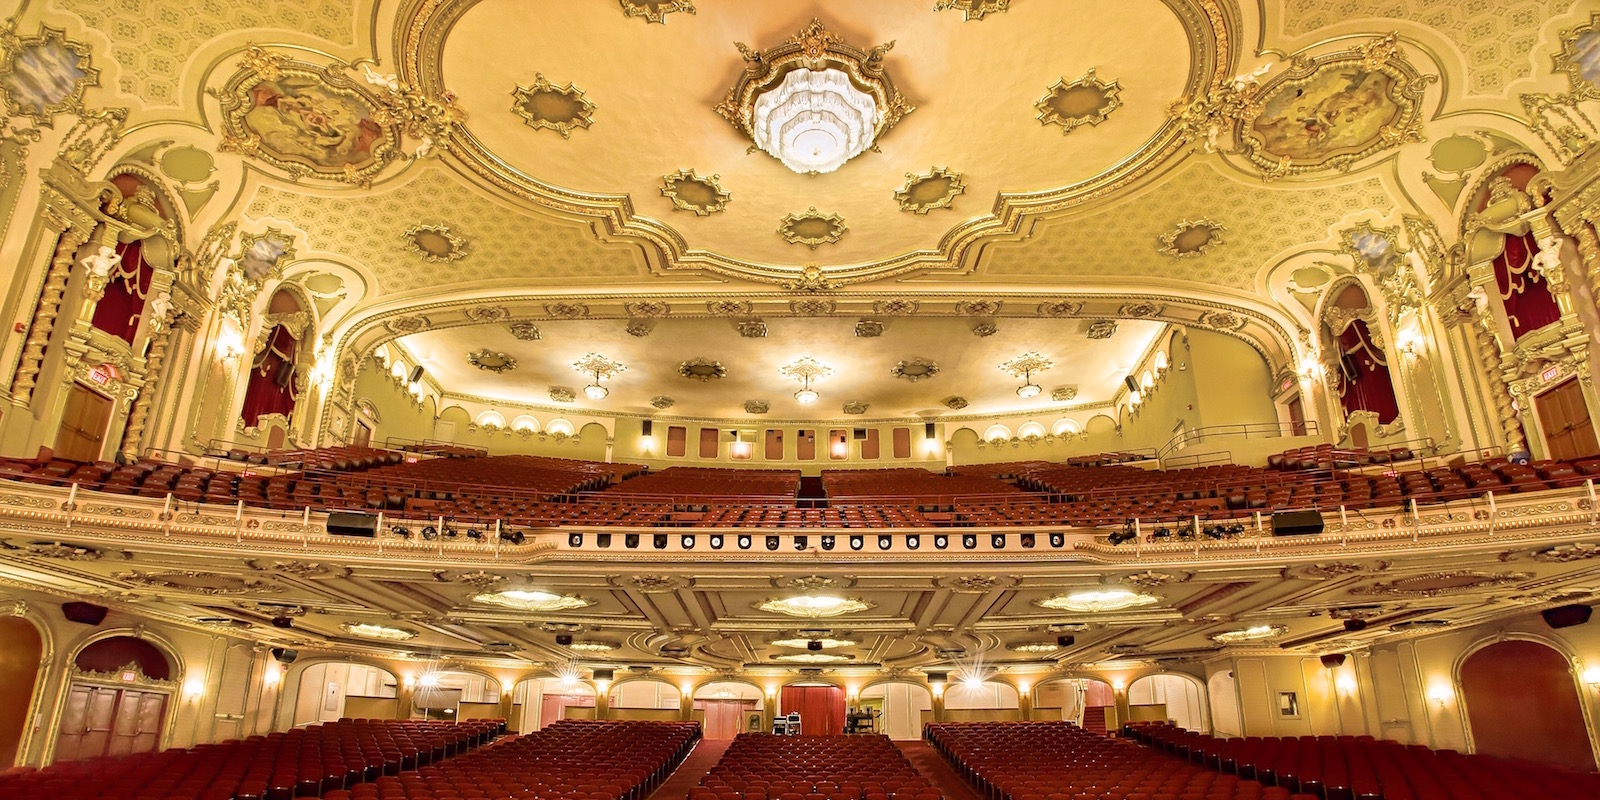 About | Palace Theatre Albany